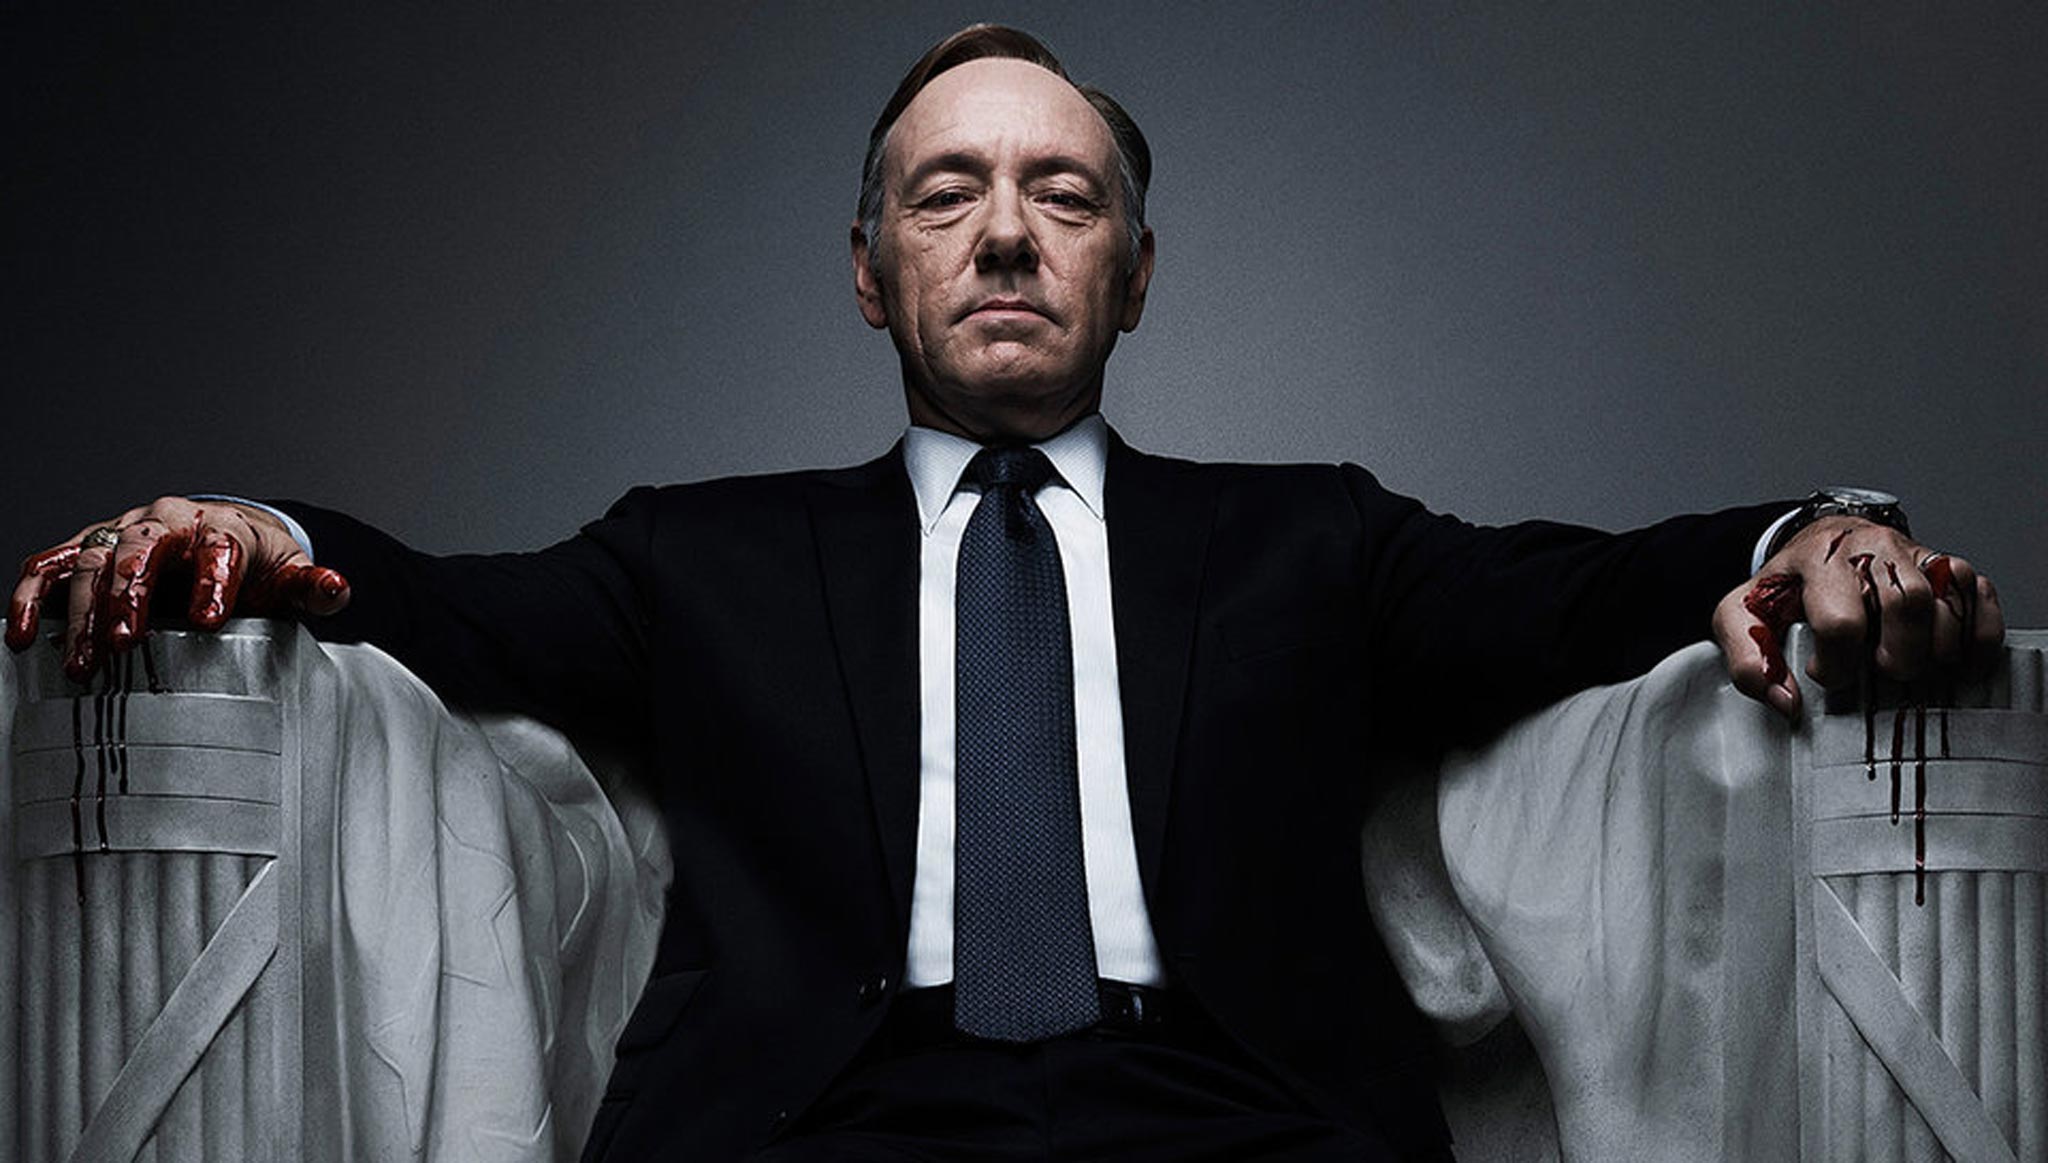 Kevin Spacey as Washington politician Frank Underwood in Netflix's House of Cards